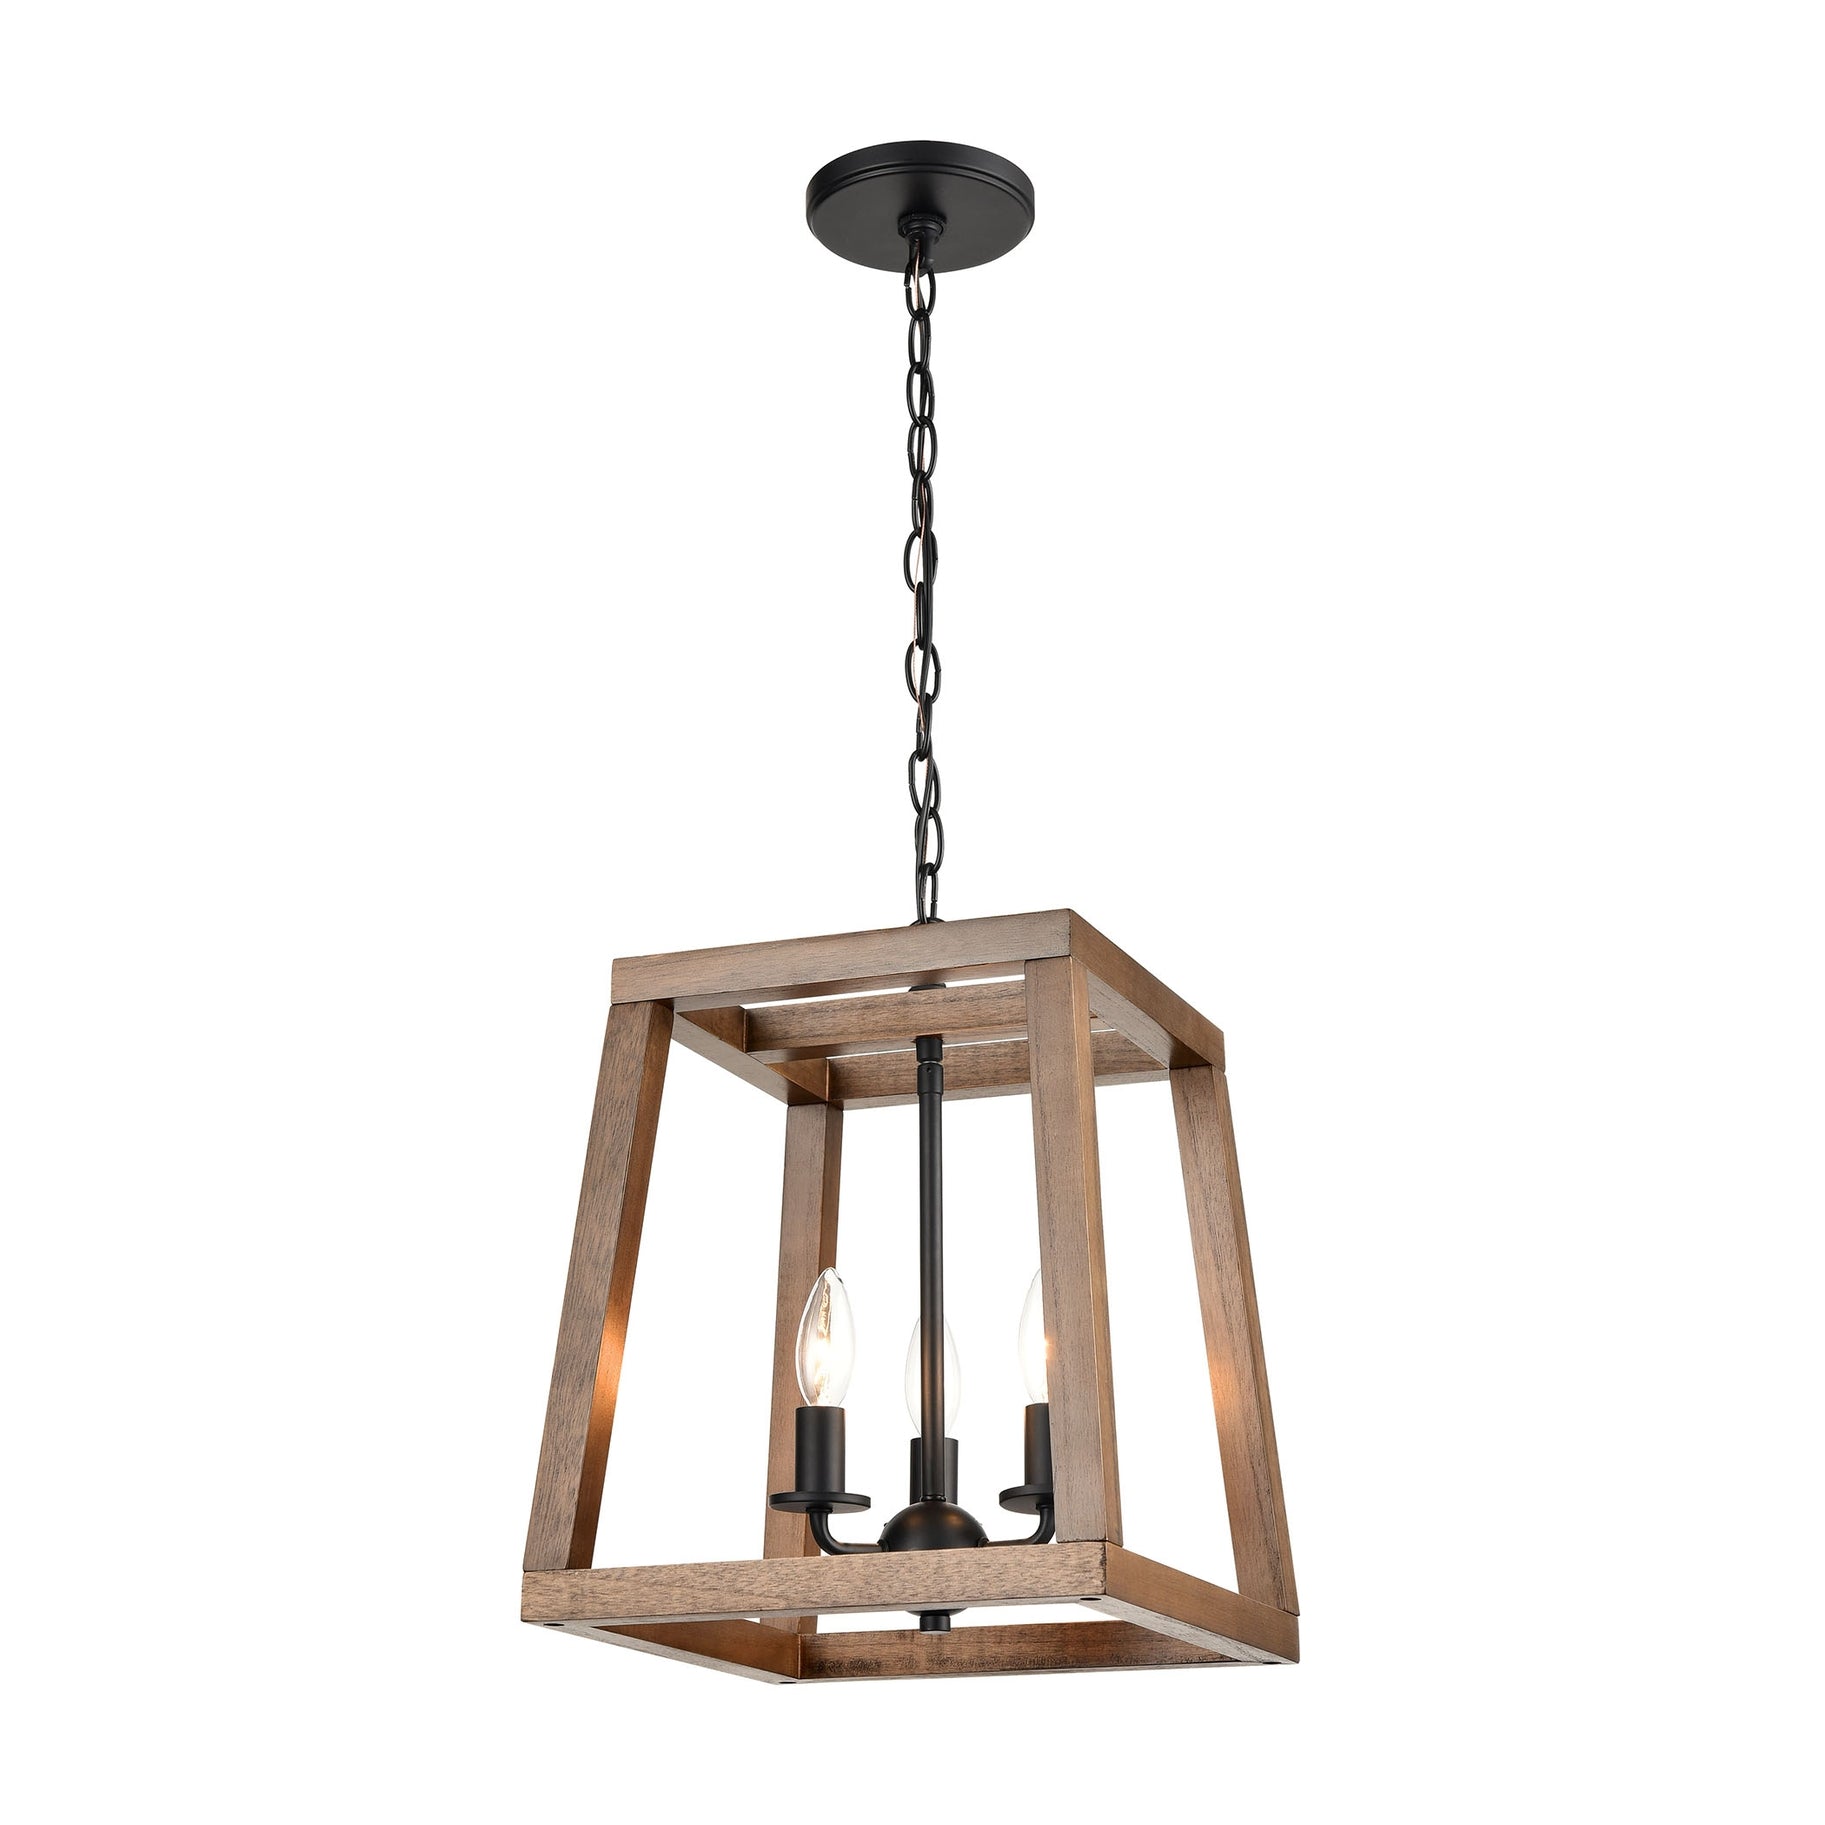 Tapered cube birchwood dining room chandelier with matte black hardware